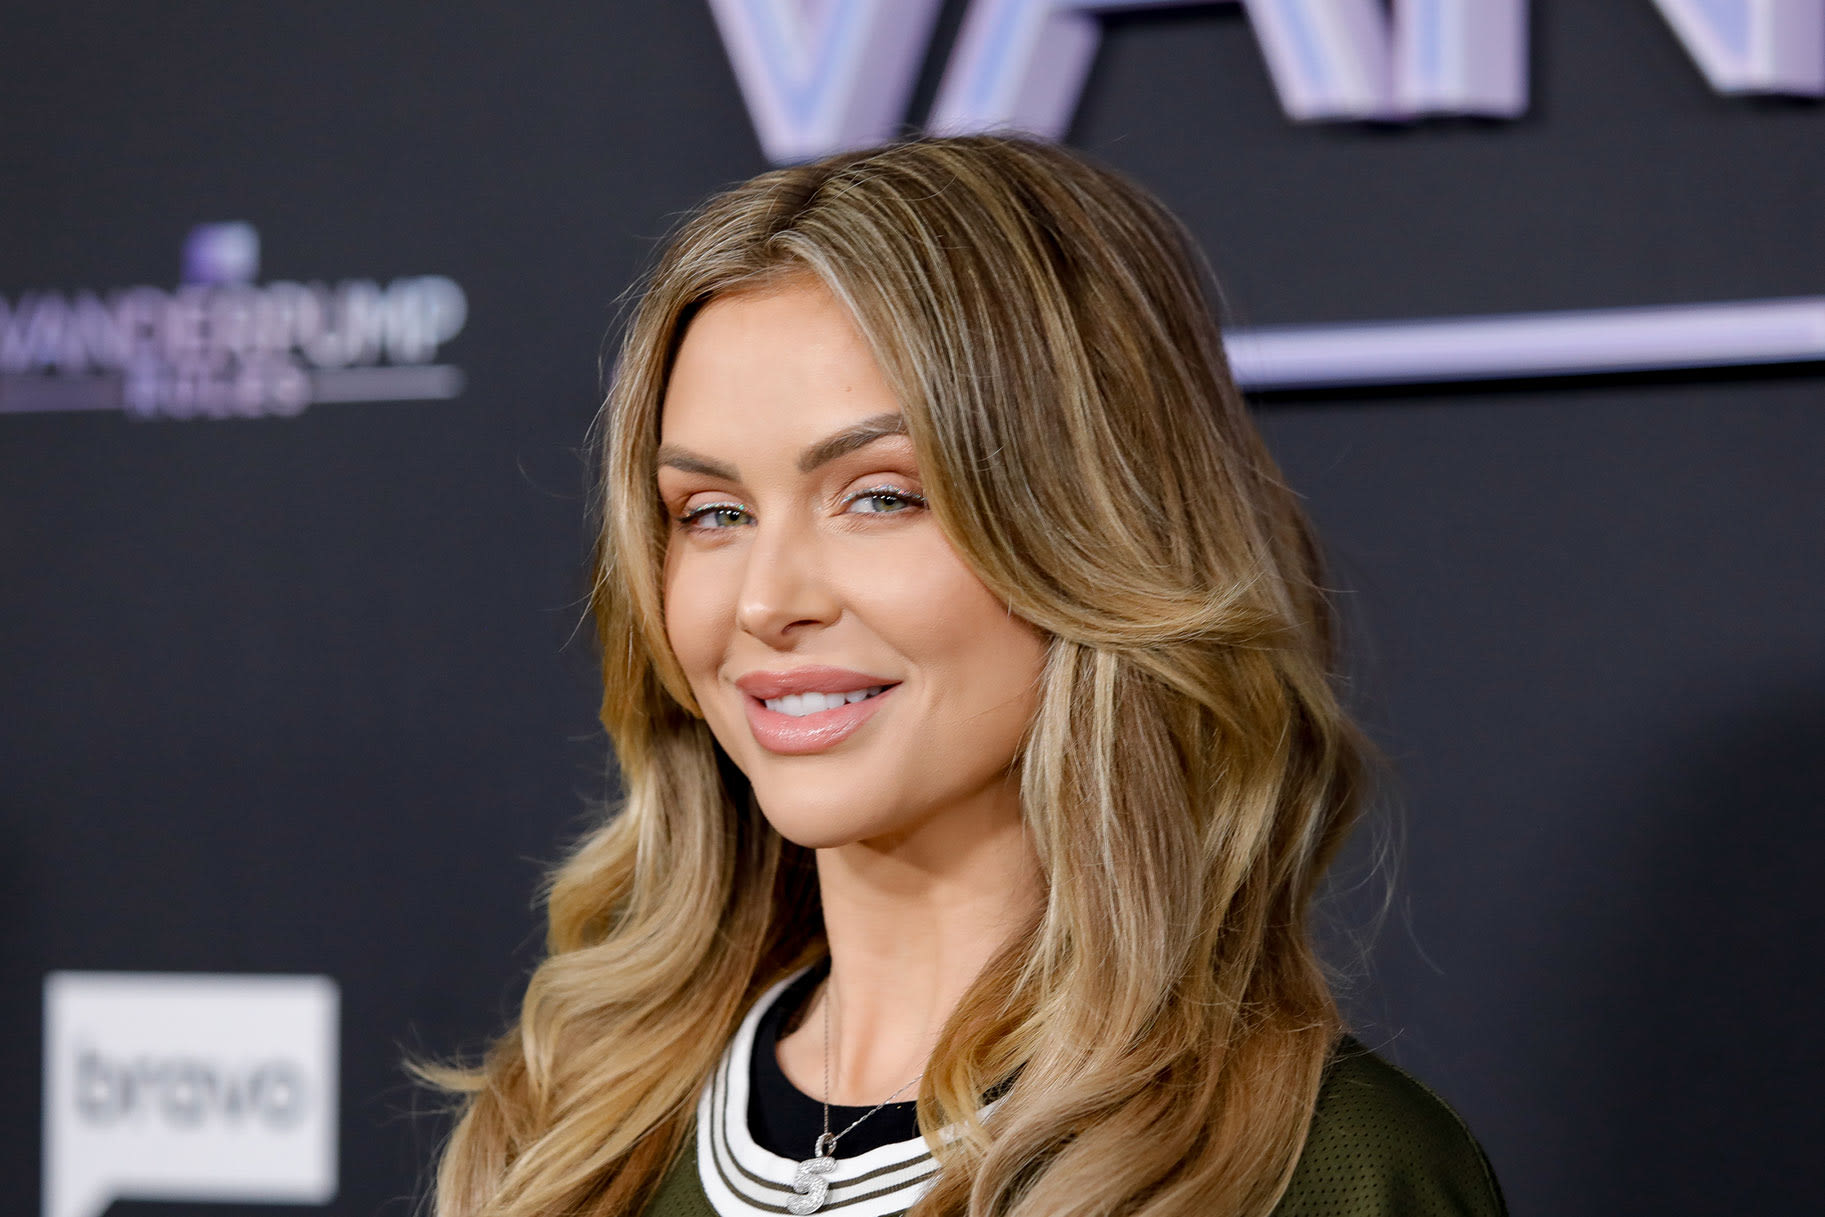 Lala Kent Is Thinking About How Her Grandkids Will React to Her “Stripping” Moment on VPR | Bravo TV Official Site